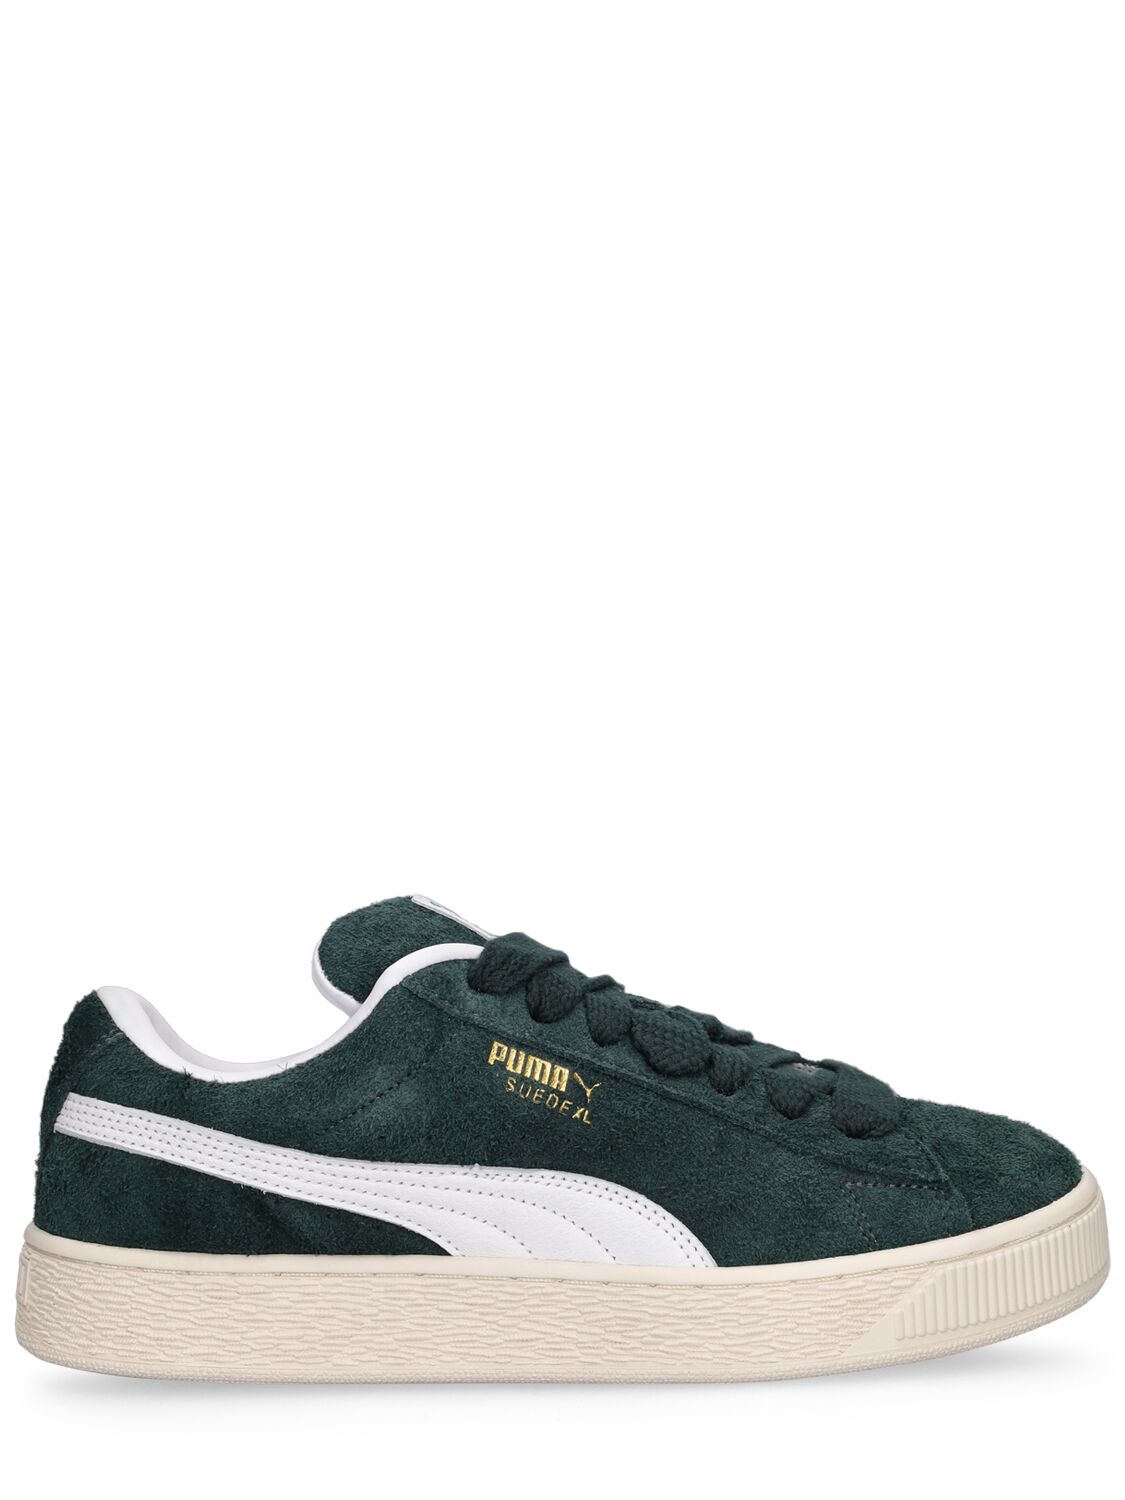 Puma Suede Xl Hairy Sneakers In Green